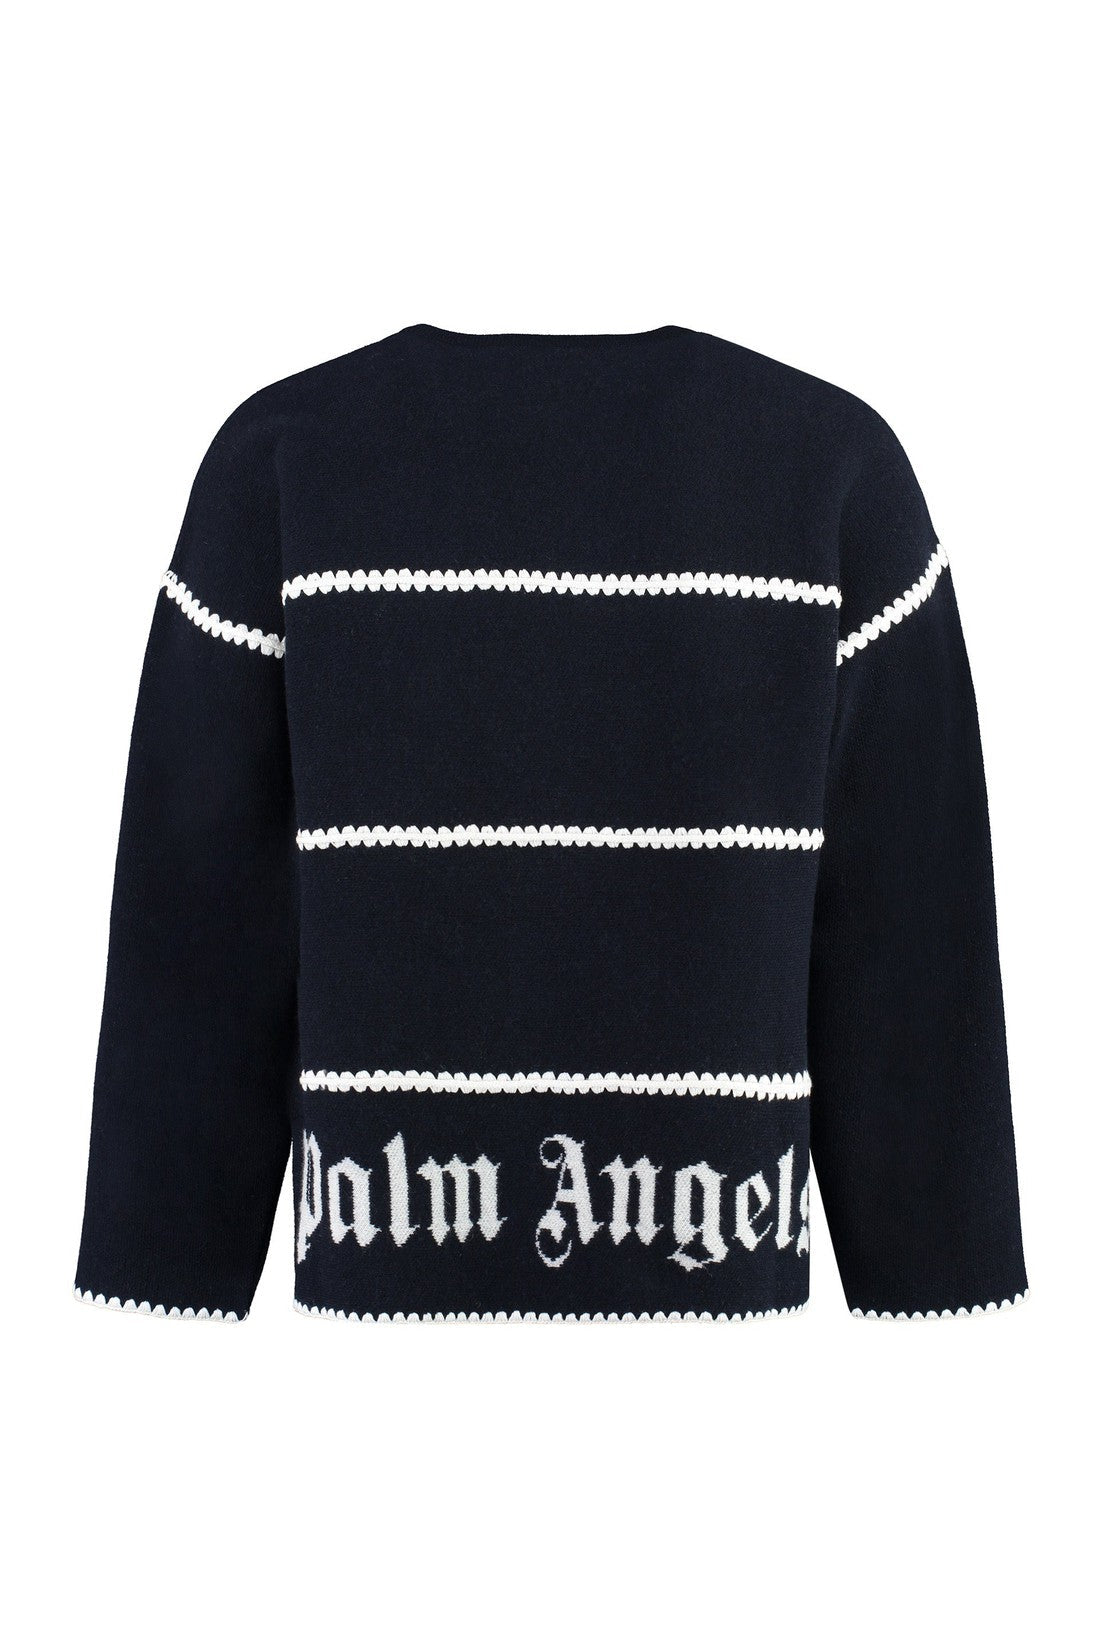 Palm Angels-OUTLET-SALE-Knit wool blend pullover-ARCHIVIST